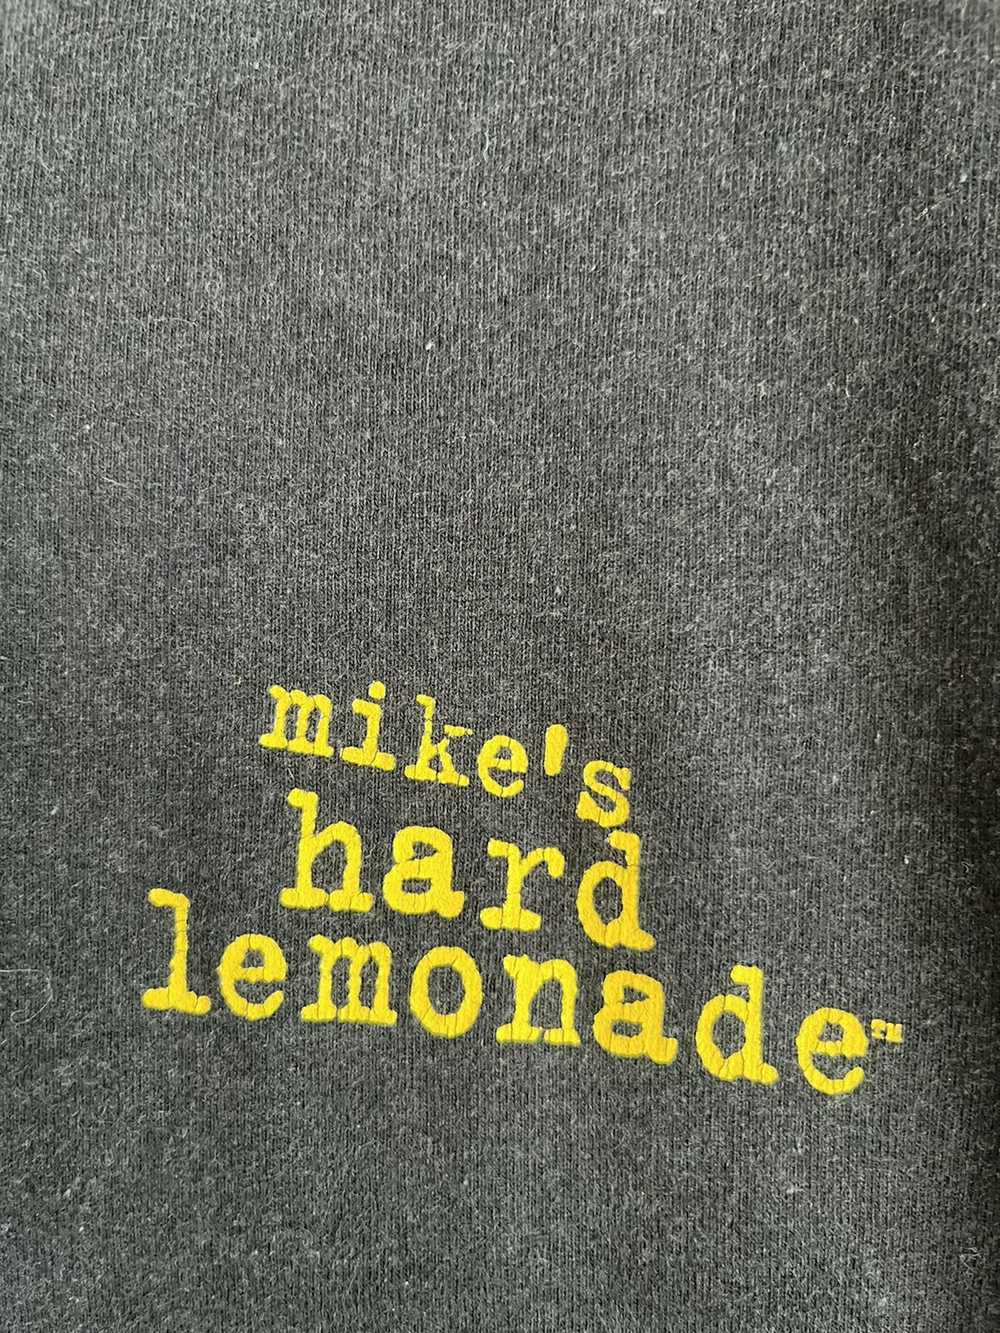 Made In Usa × Streetwear × Vintage Mike’s hard le… - image 2